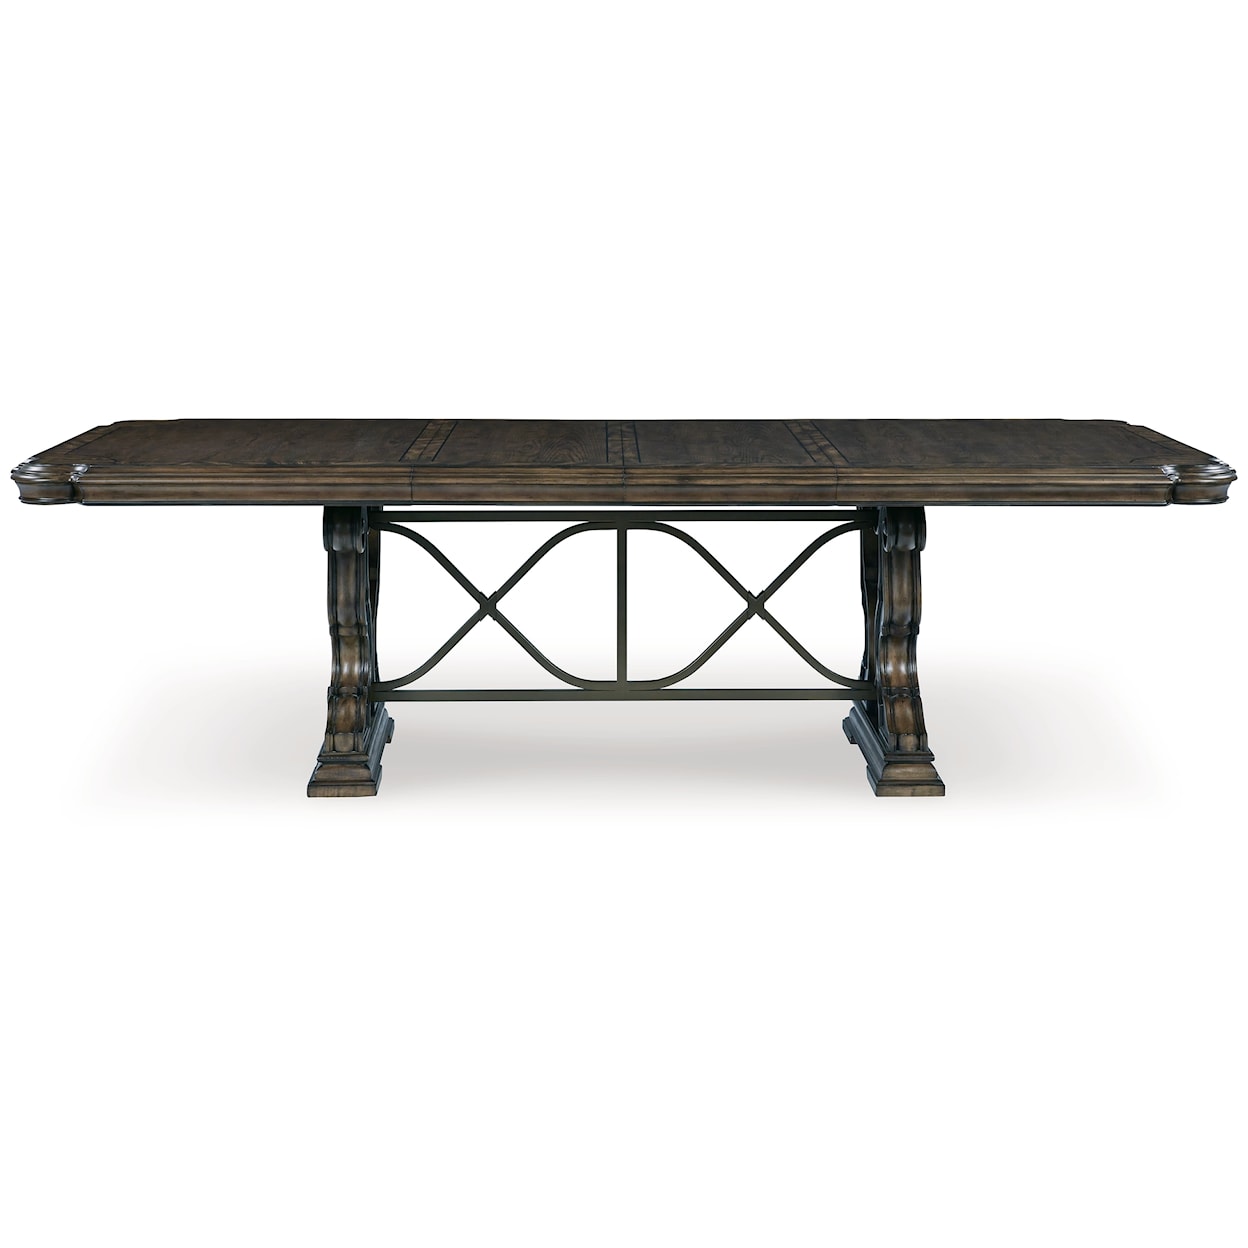 Benchcraft Maylee Dining Extension Table